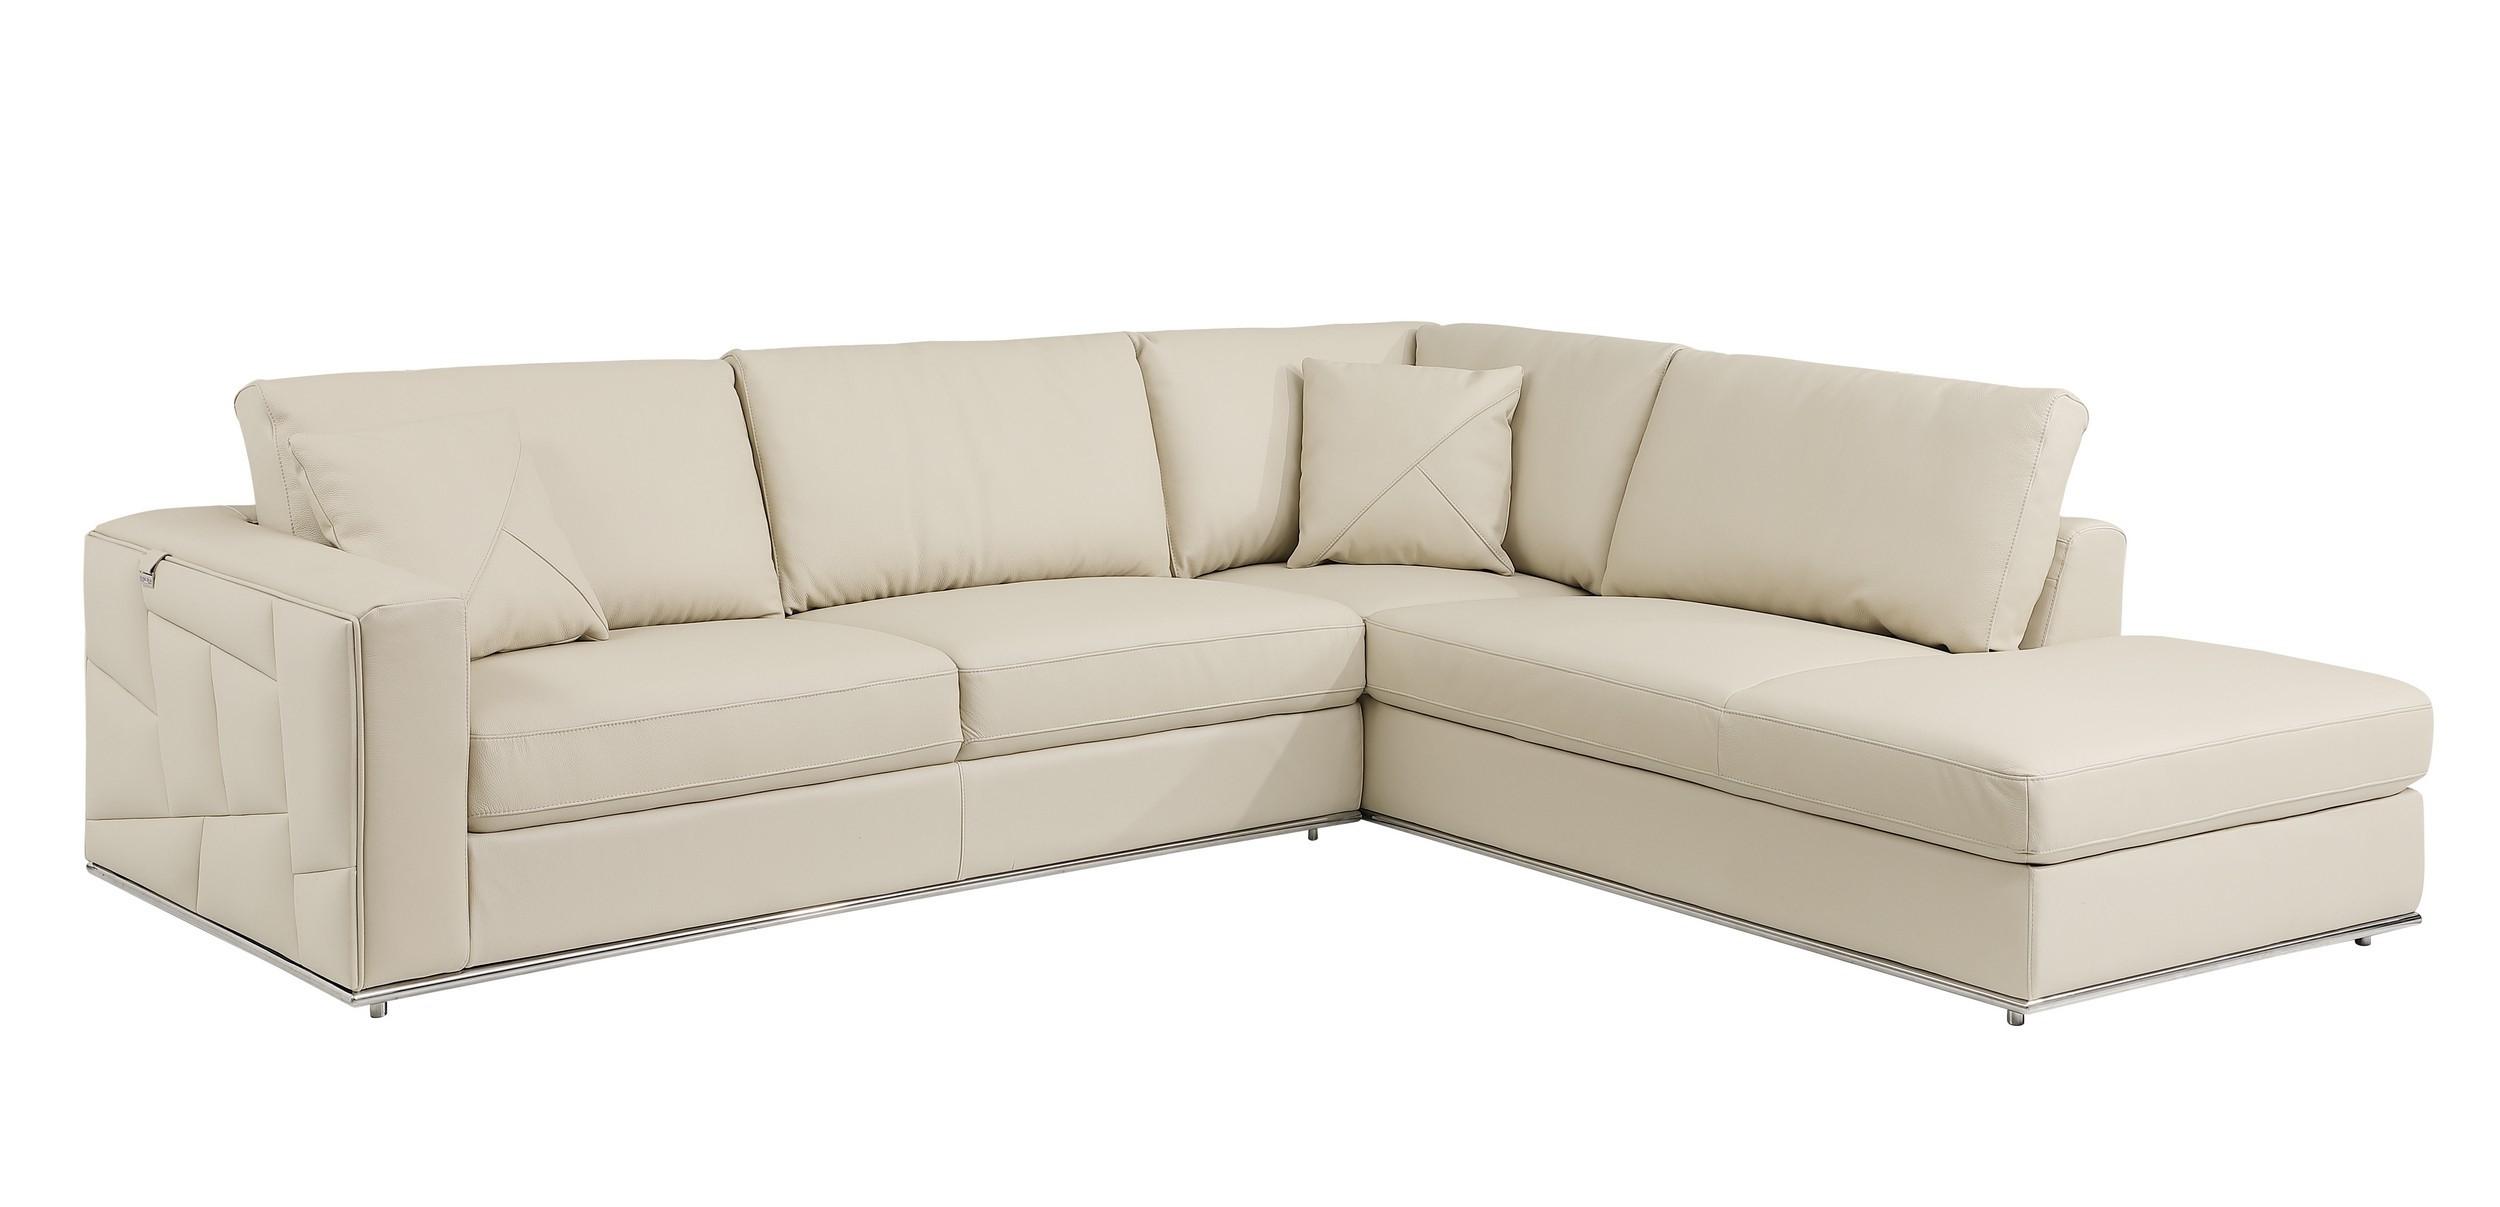 Contemporary Sectional Sofa 998 998-BEIGE-RAF-SECT in Beige Top grain leather